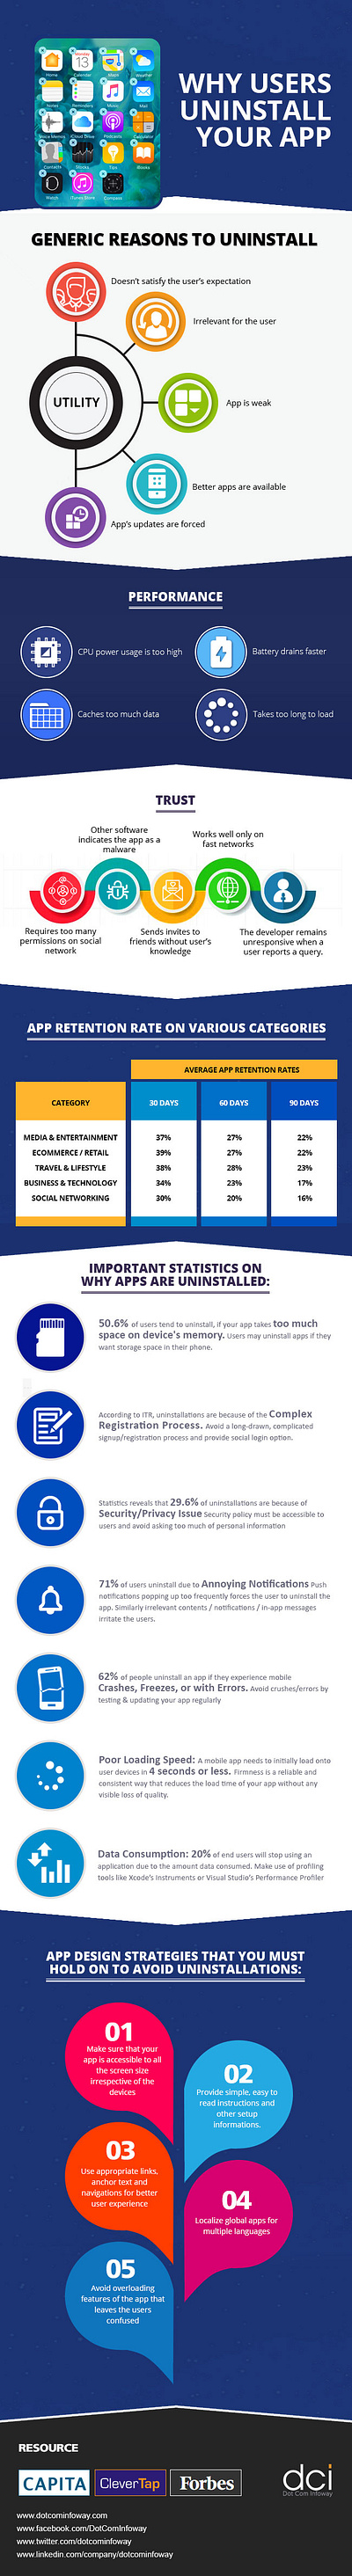 Why Users Uninstall Your Mobile App? app appdevelopment appmarketing marketingstrategy mobileapps user